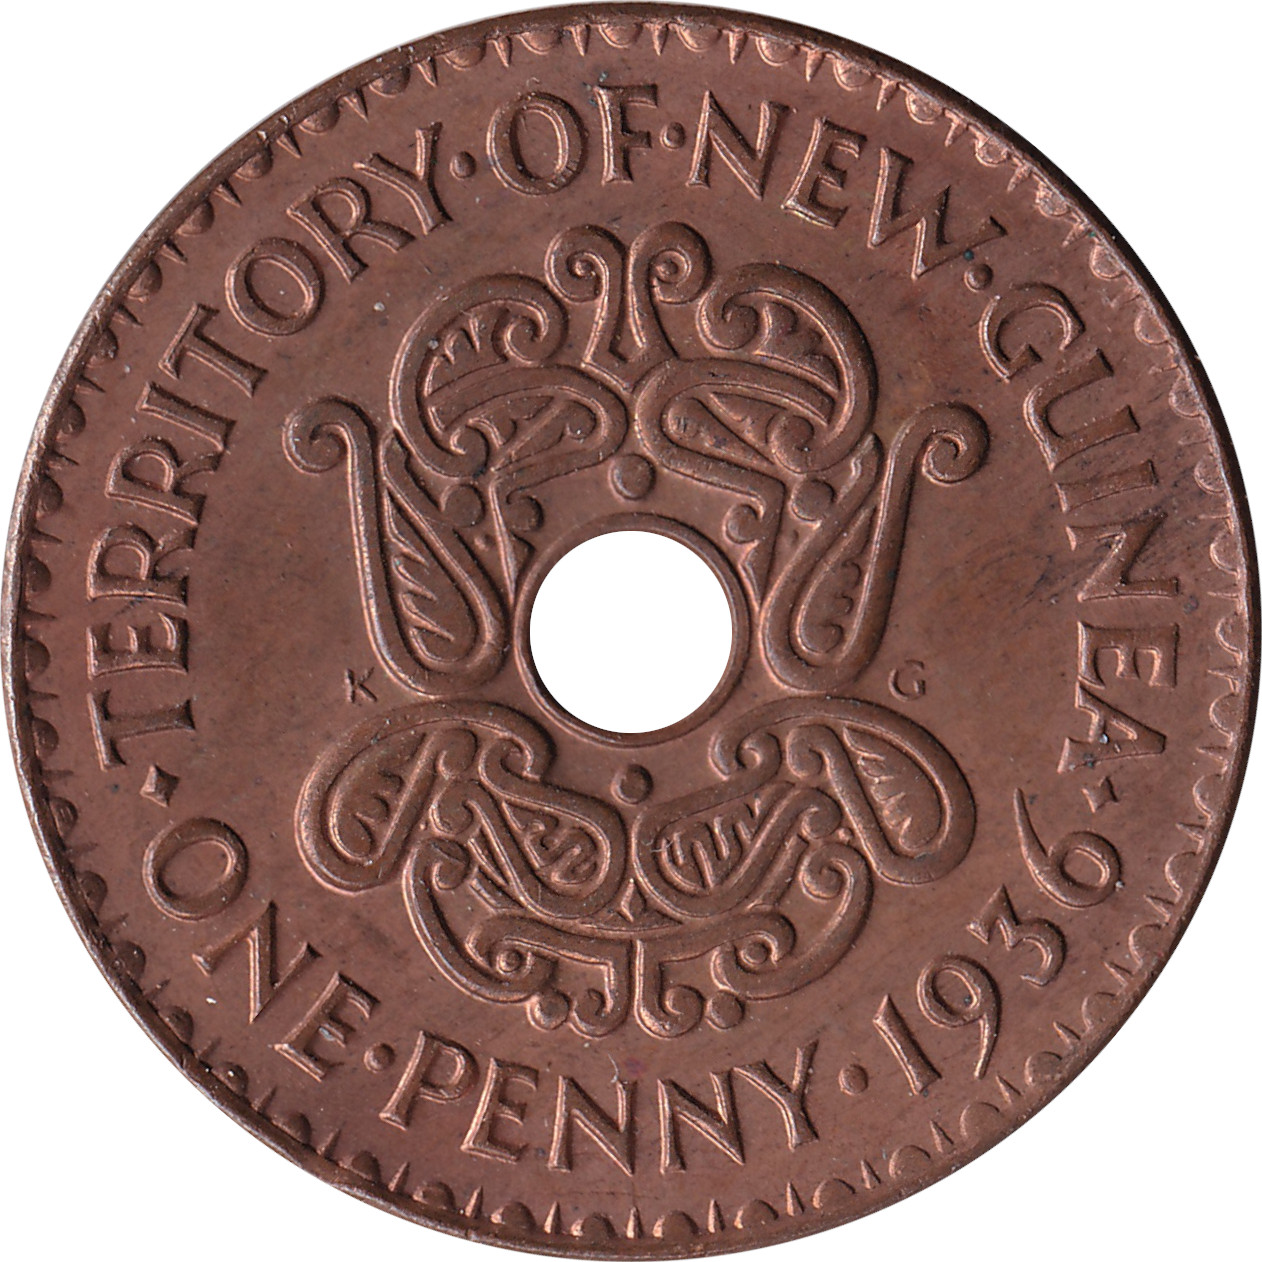 1 penny - Georges V - Canard